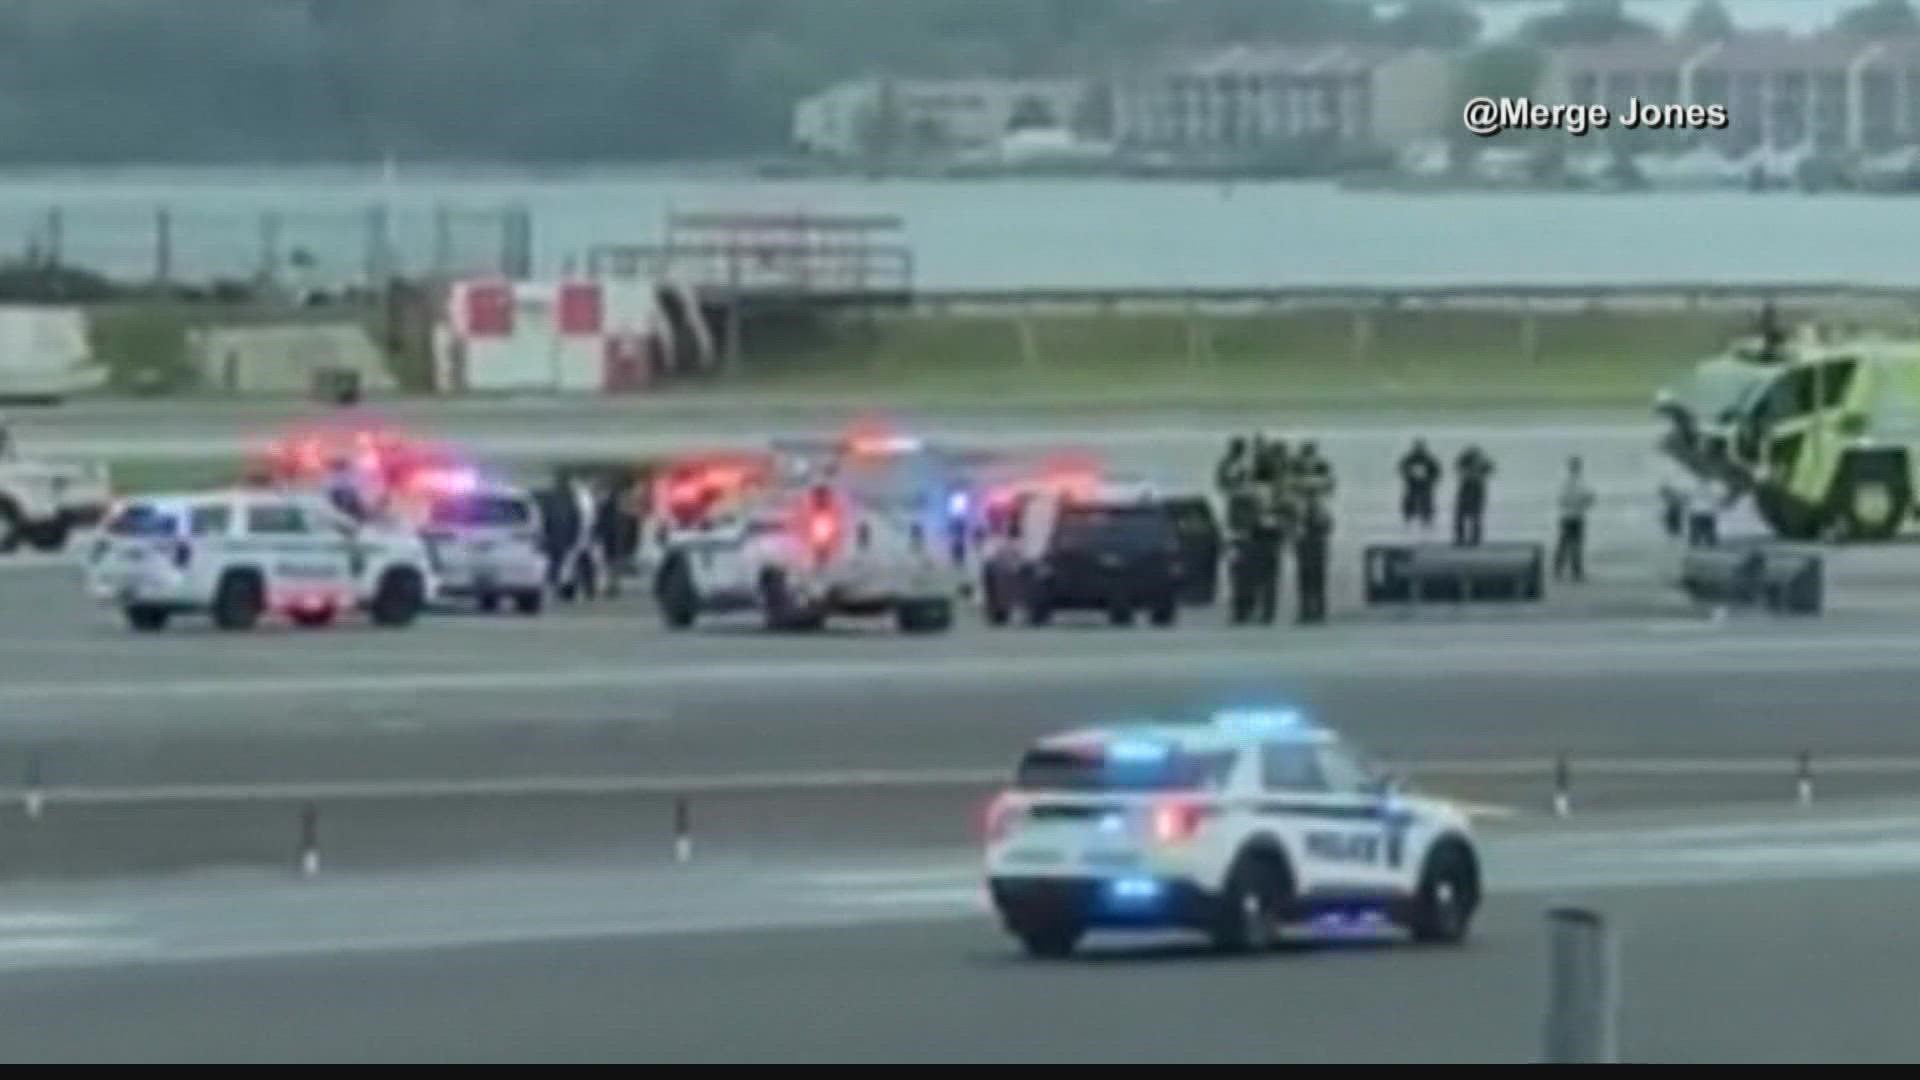 Flight 4817 landed at LaGuardia Airport where police took a passenger into custody for questioning.